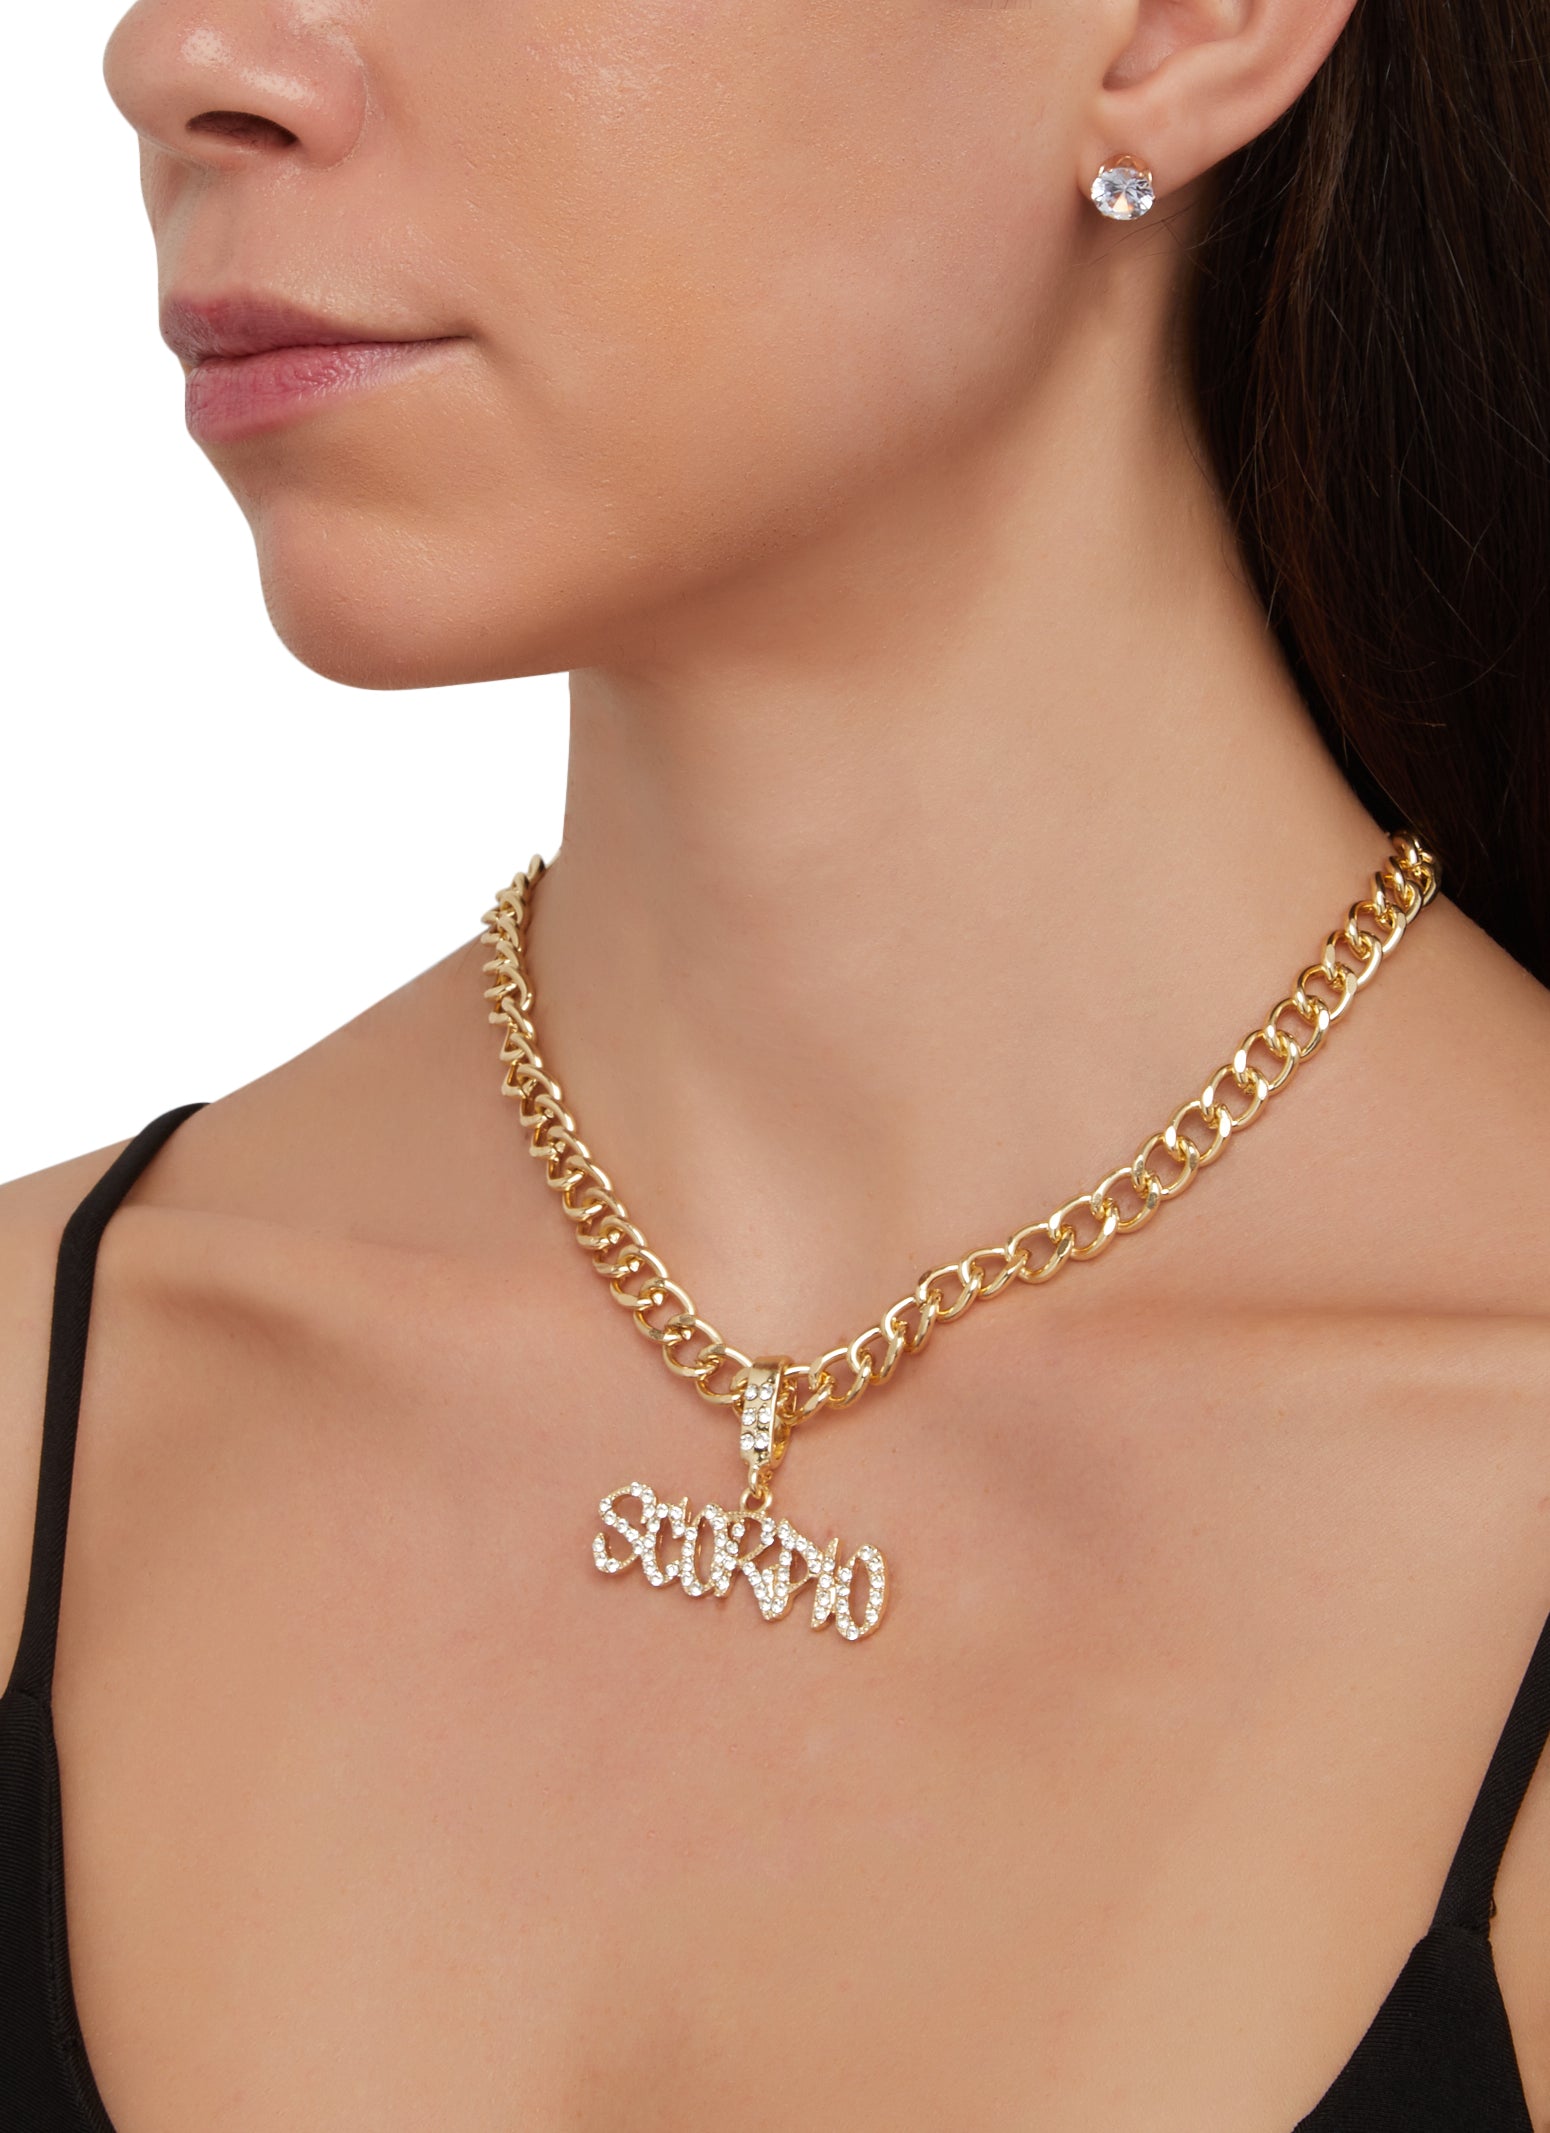 Brooke Gregson | Scorpio 14k Gold Diamond Constellation Astrology Necklace  at Voiage Jewelry